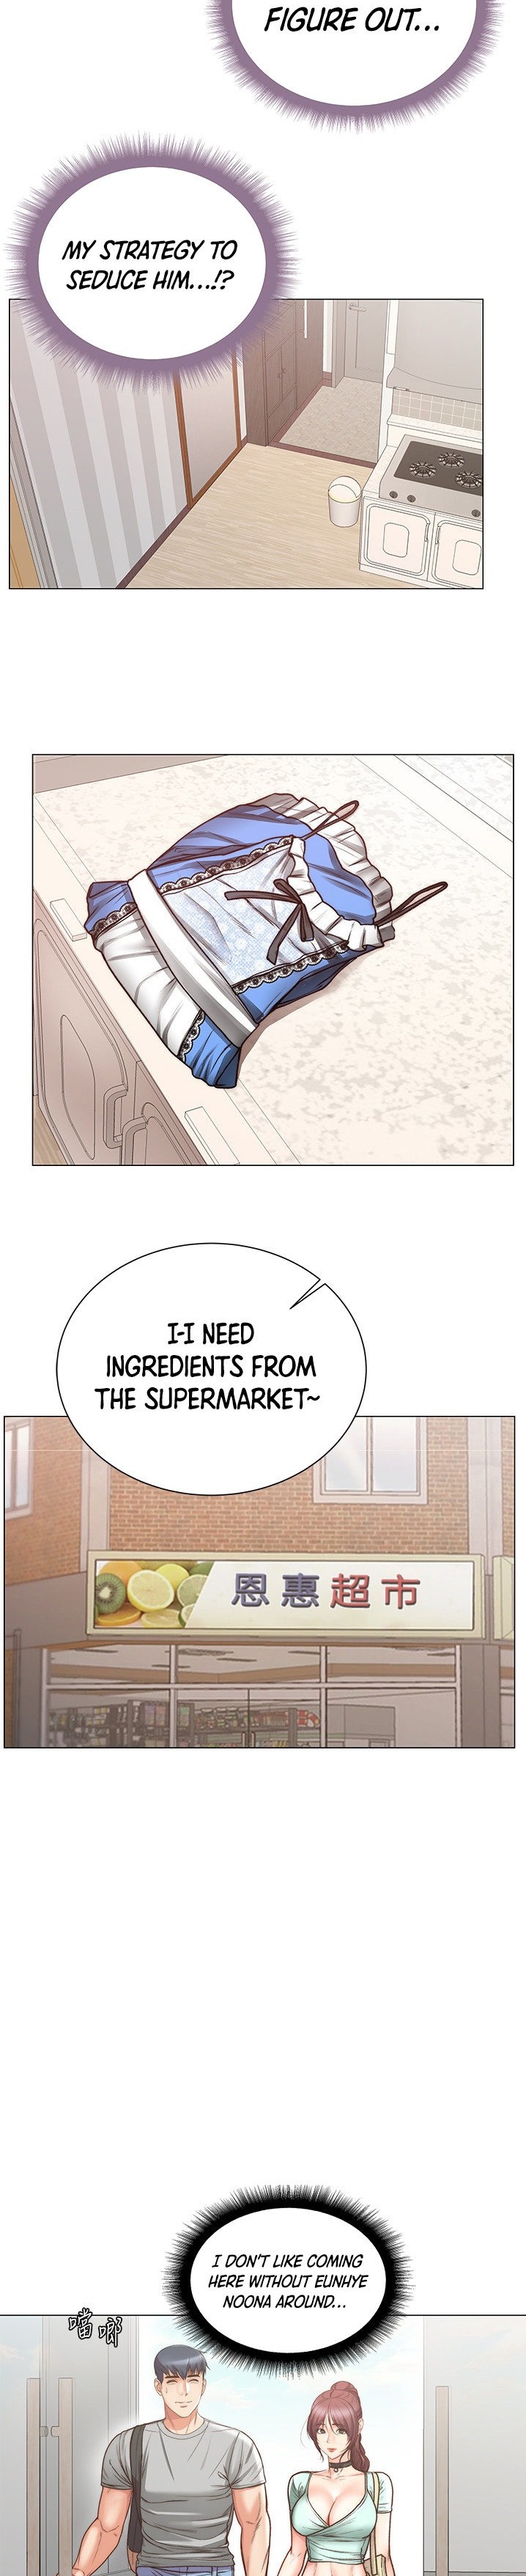 Eunhye’s Supermarket - Chapter 61 Page 5